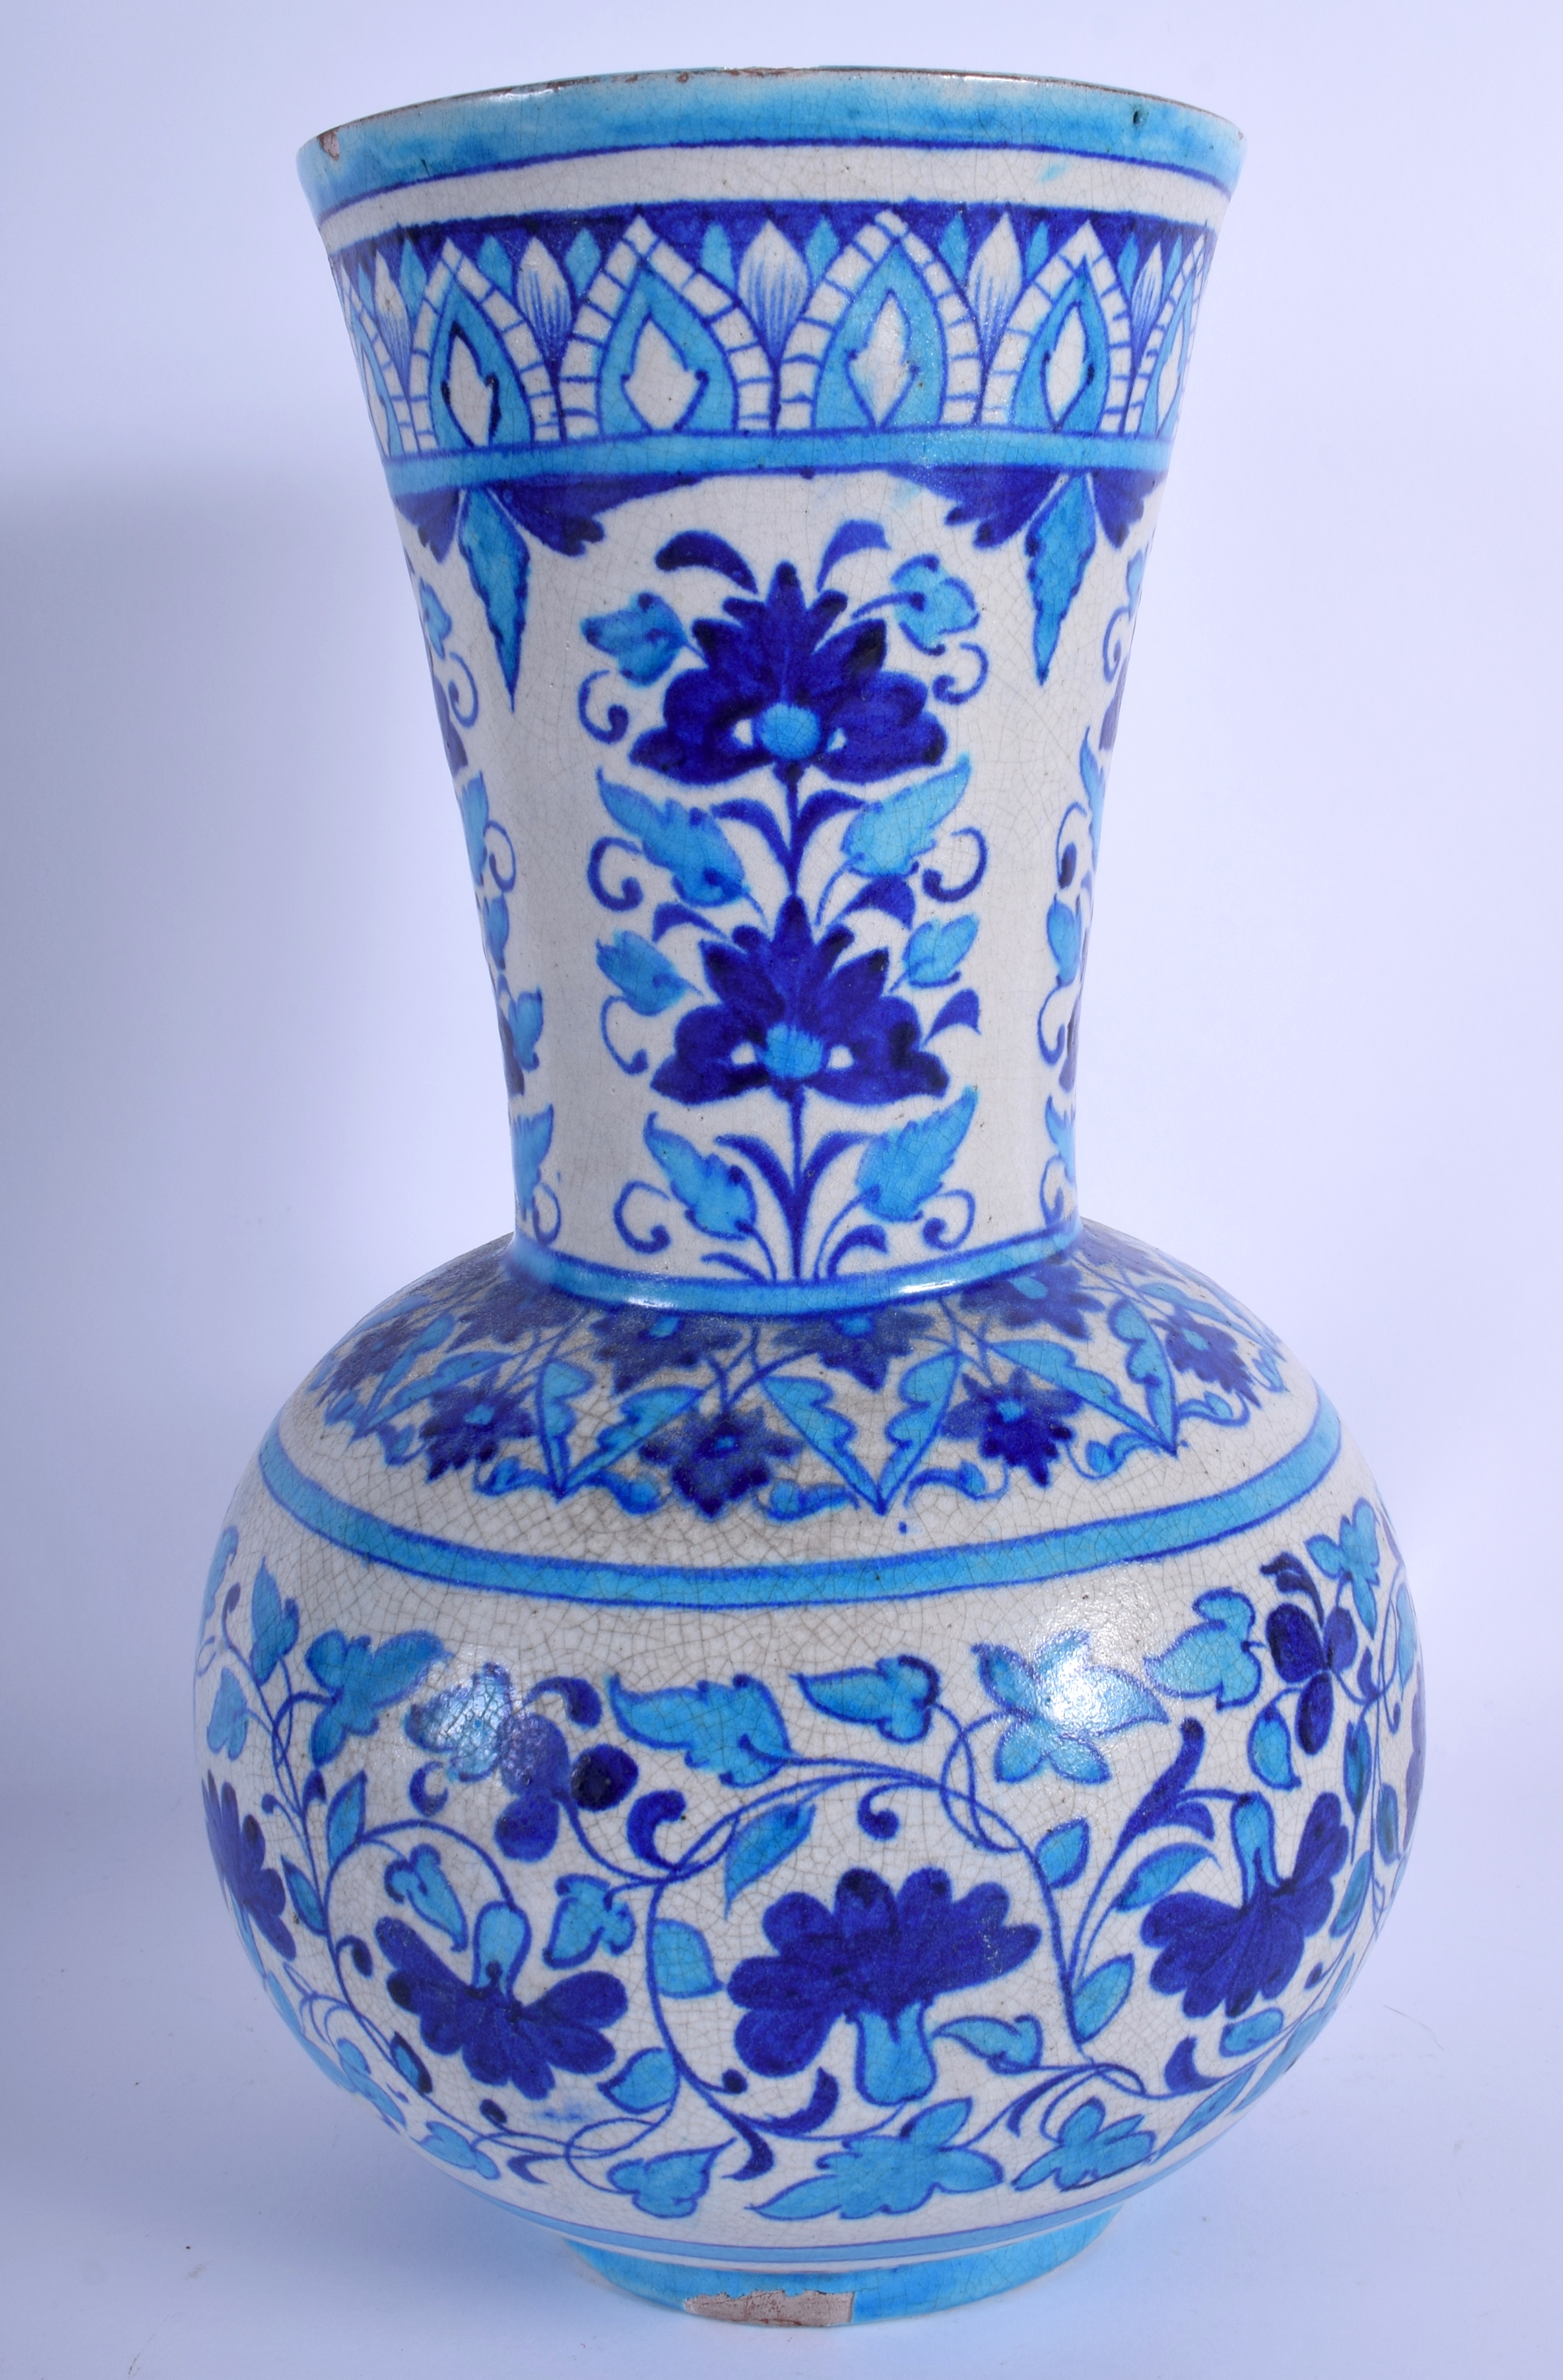 A LARGE PERSIAN MIDDLE EASTERN ISLAMIC FAIENCE BLUE VASE painted with flowers. 34 cm high. - Image 2 of 4